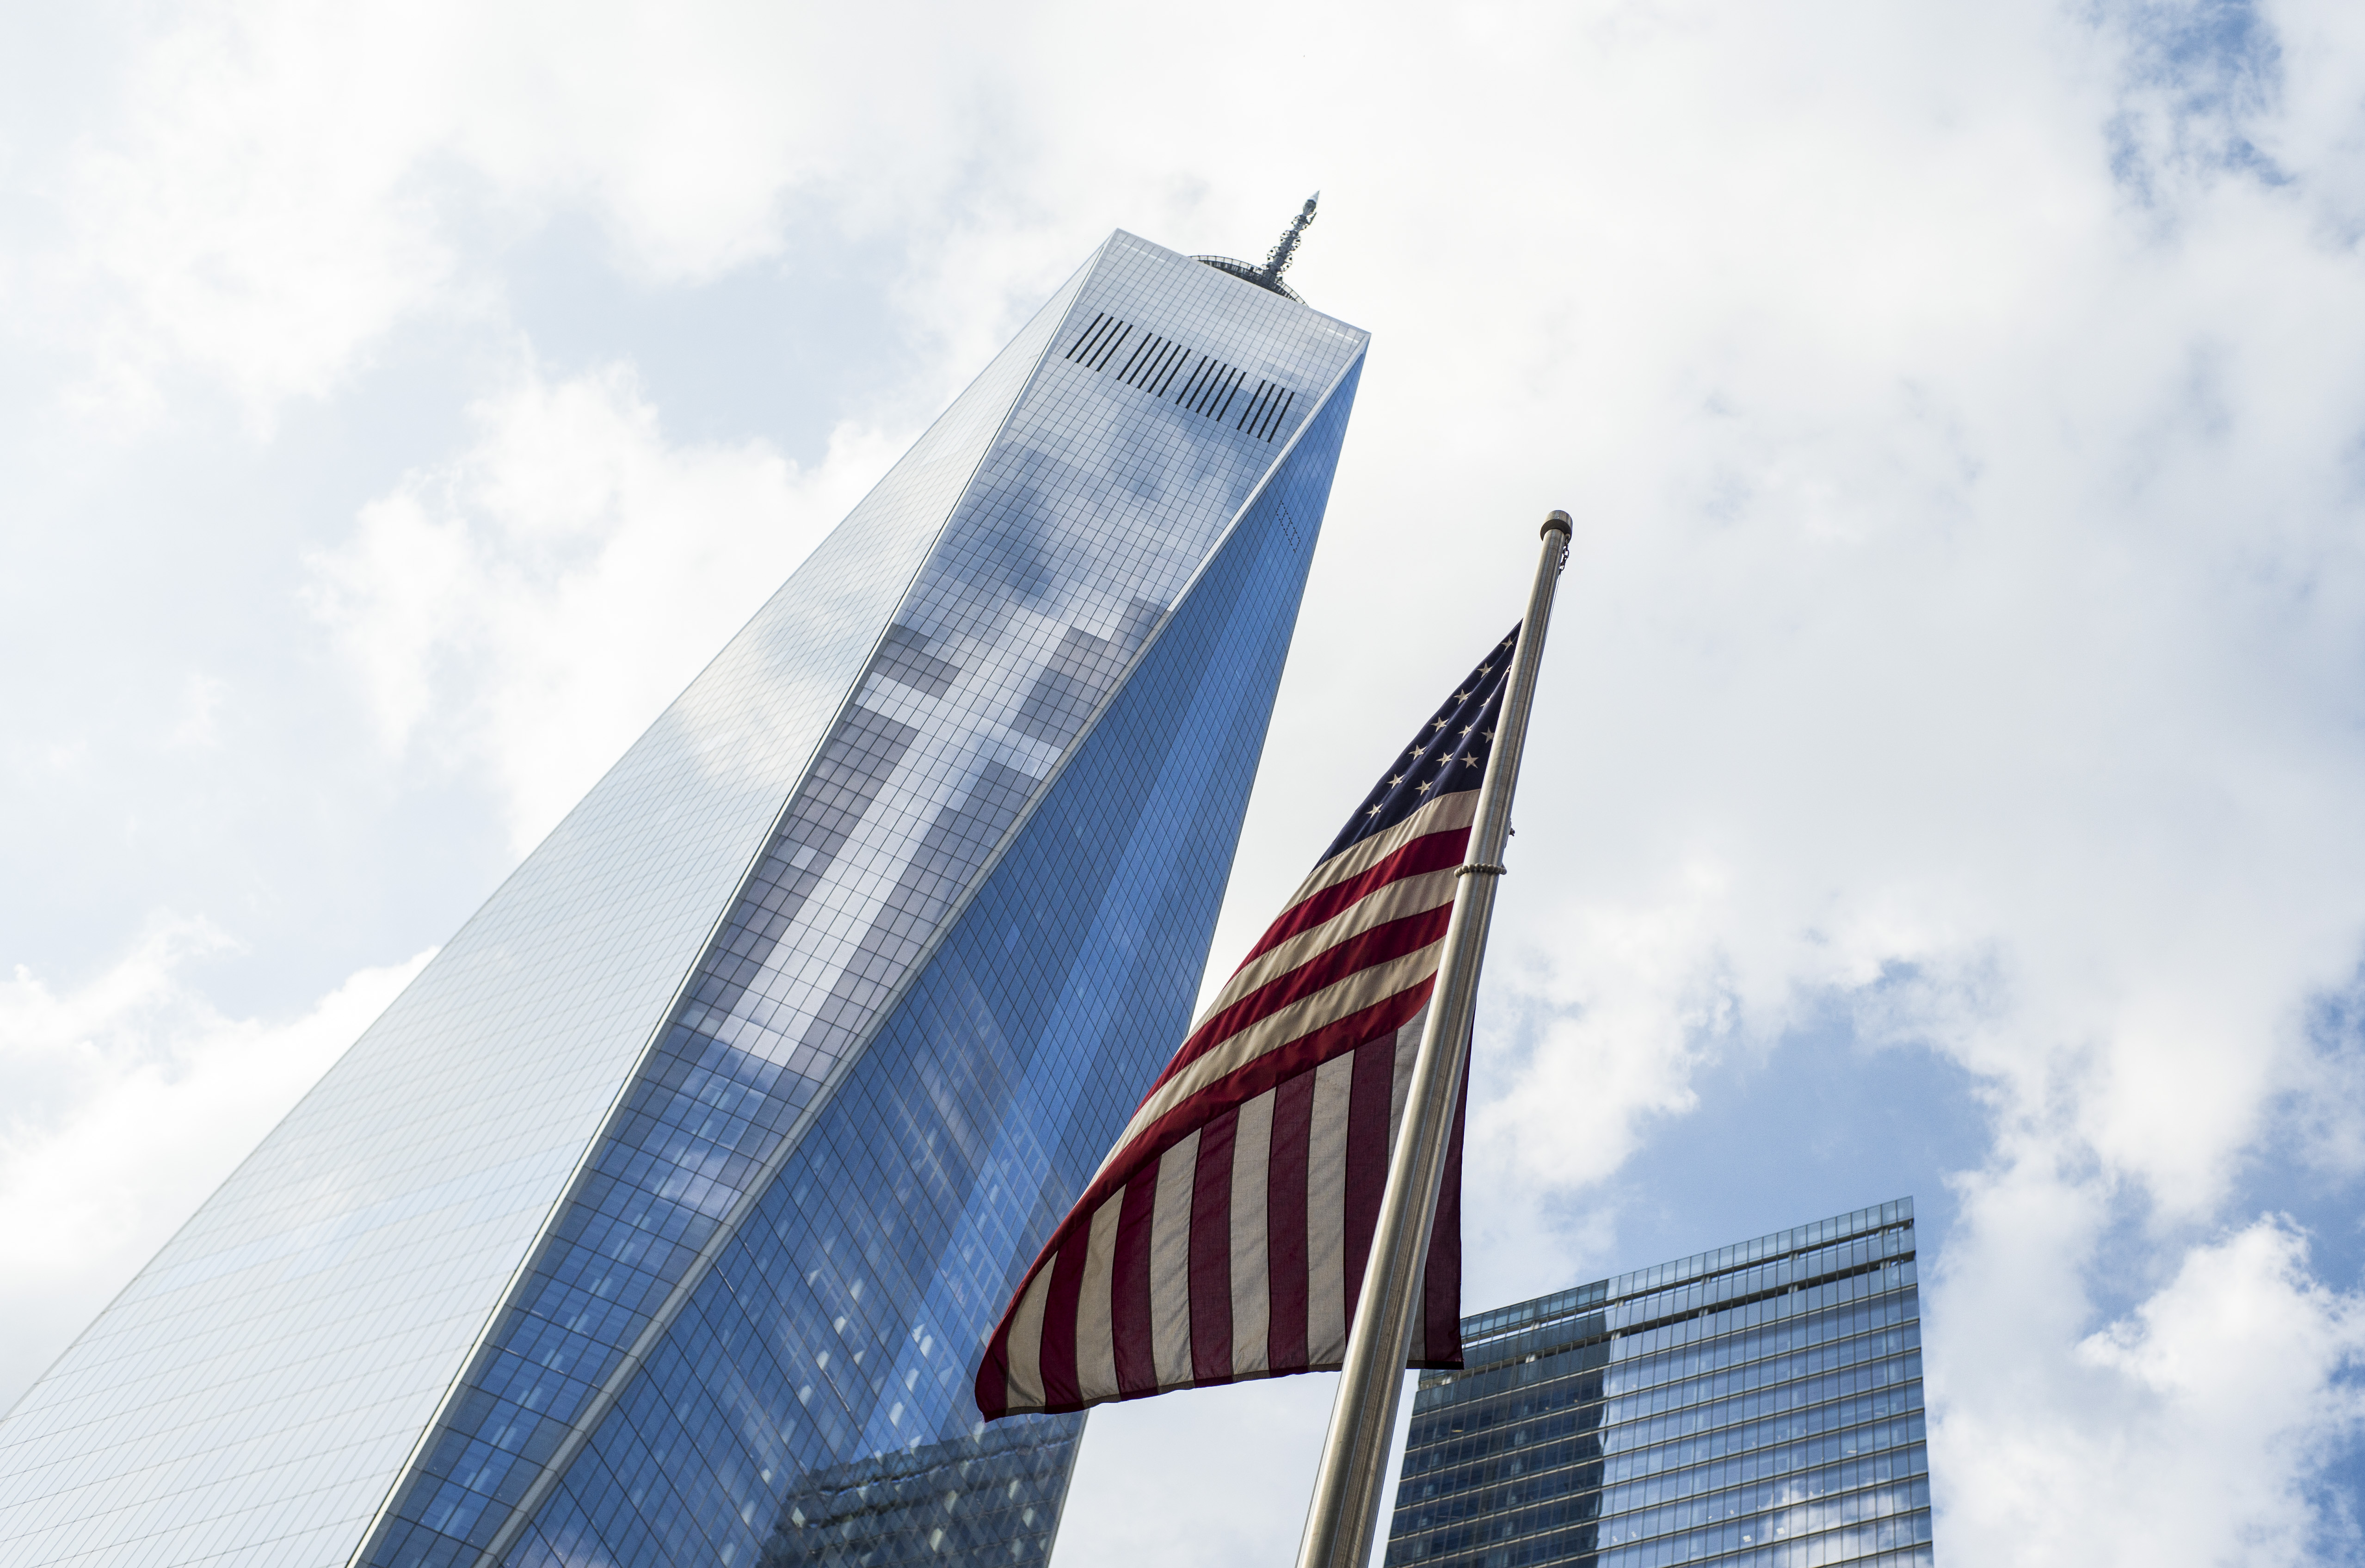 An American flag flies at the 9/11 Memorial as One World Trade Center towers before a partly cloudy sky in the background.